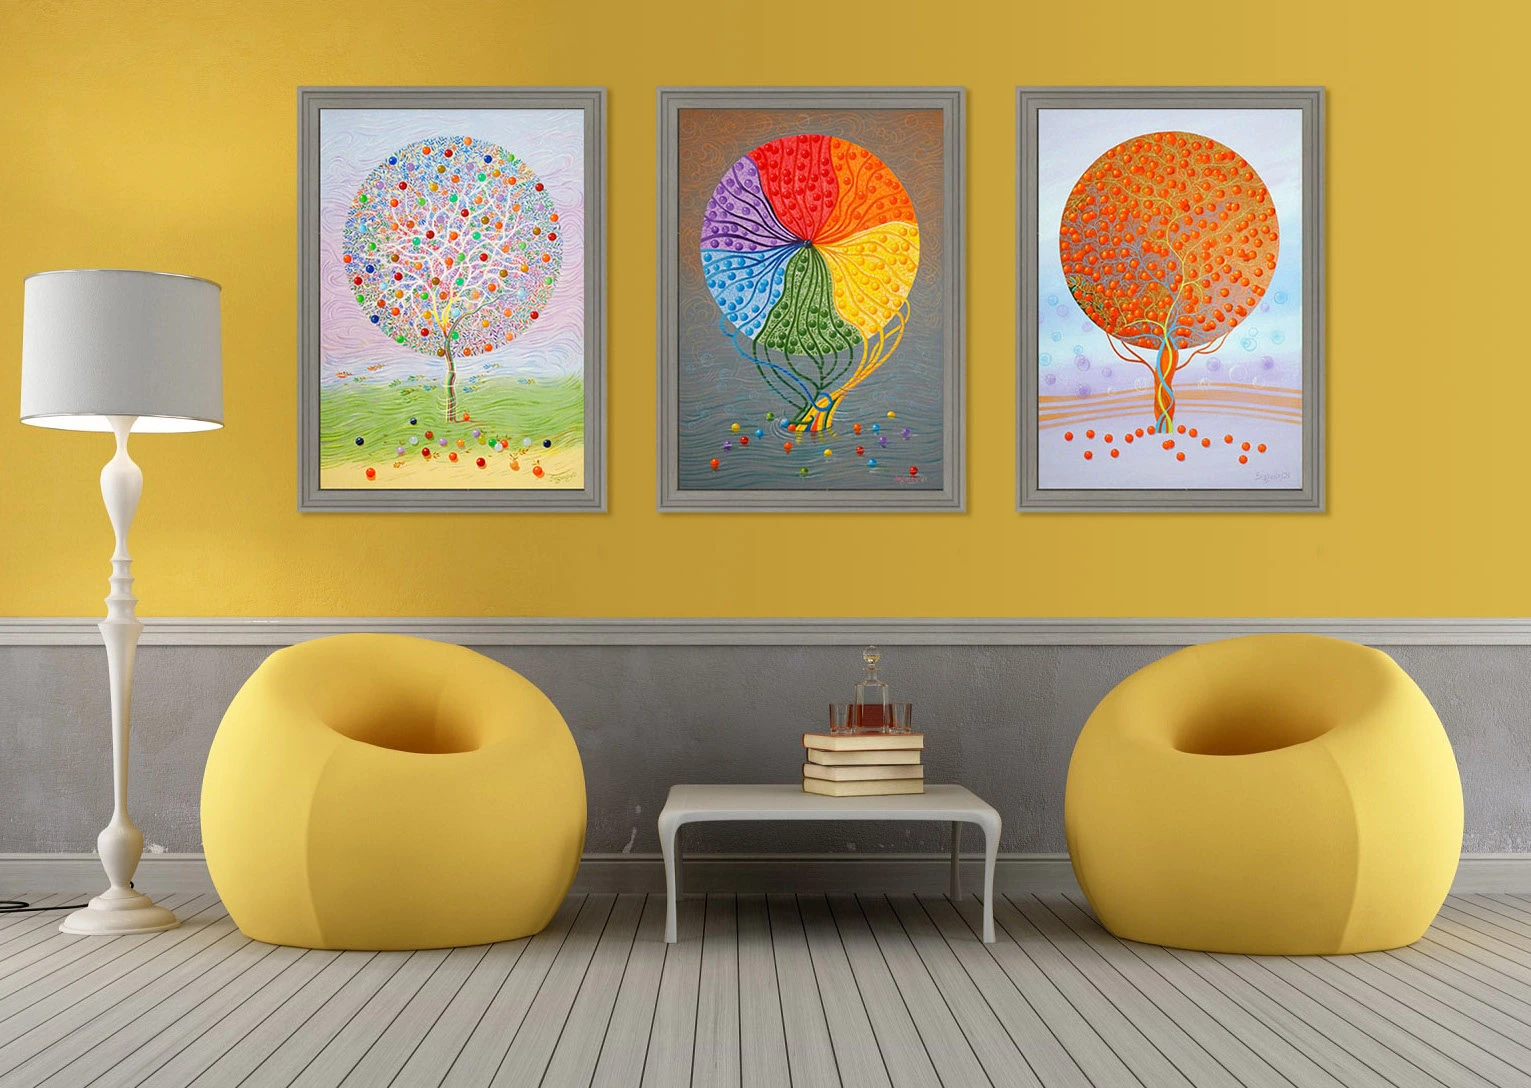 A trio of tree images painted by artist Peter Segasby creates a beautiful interior.